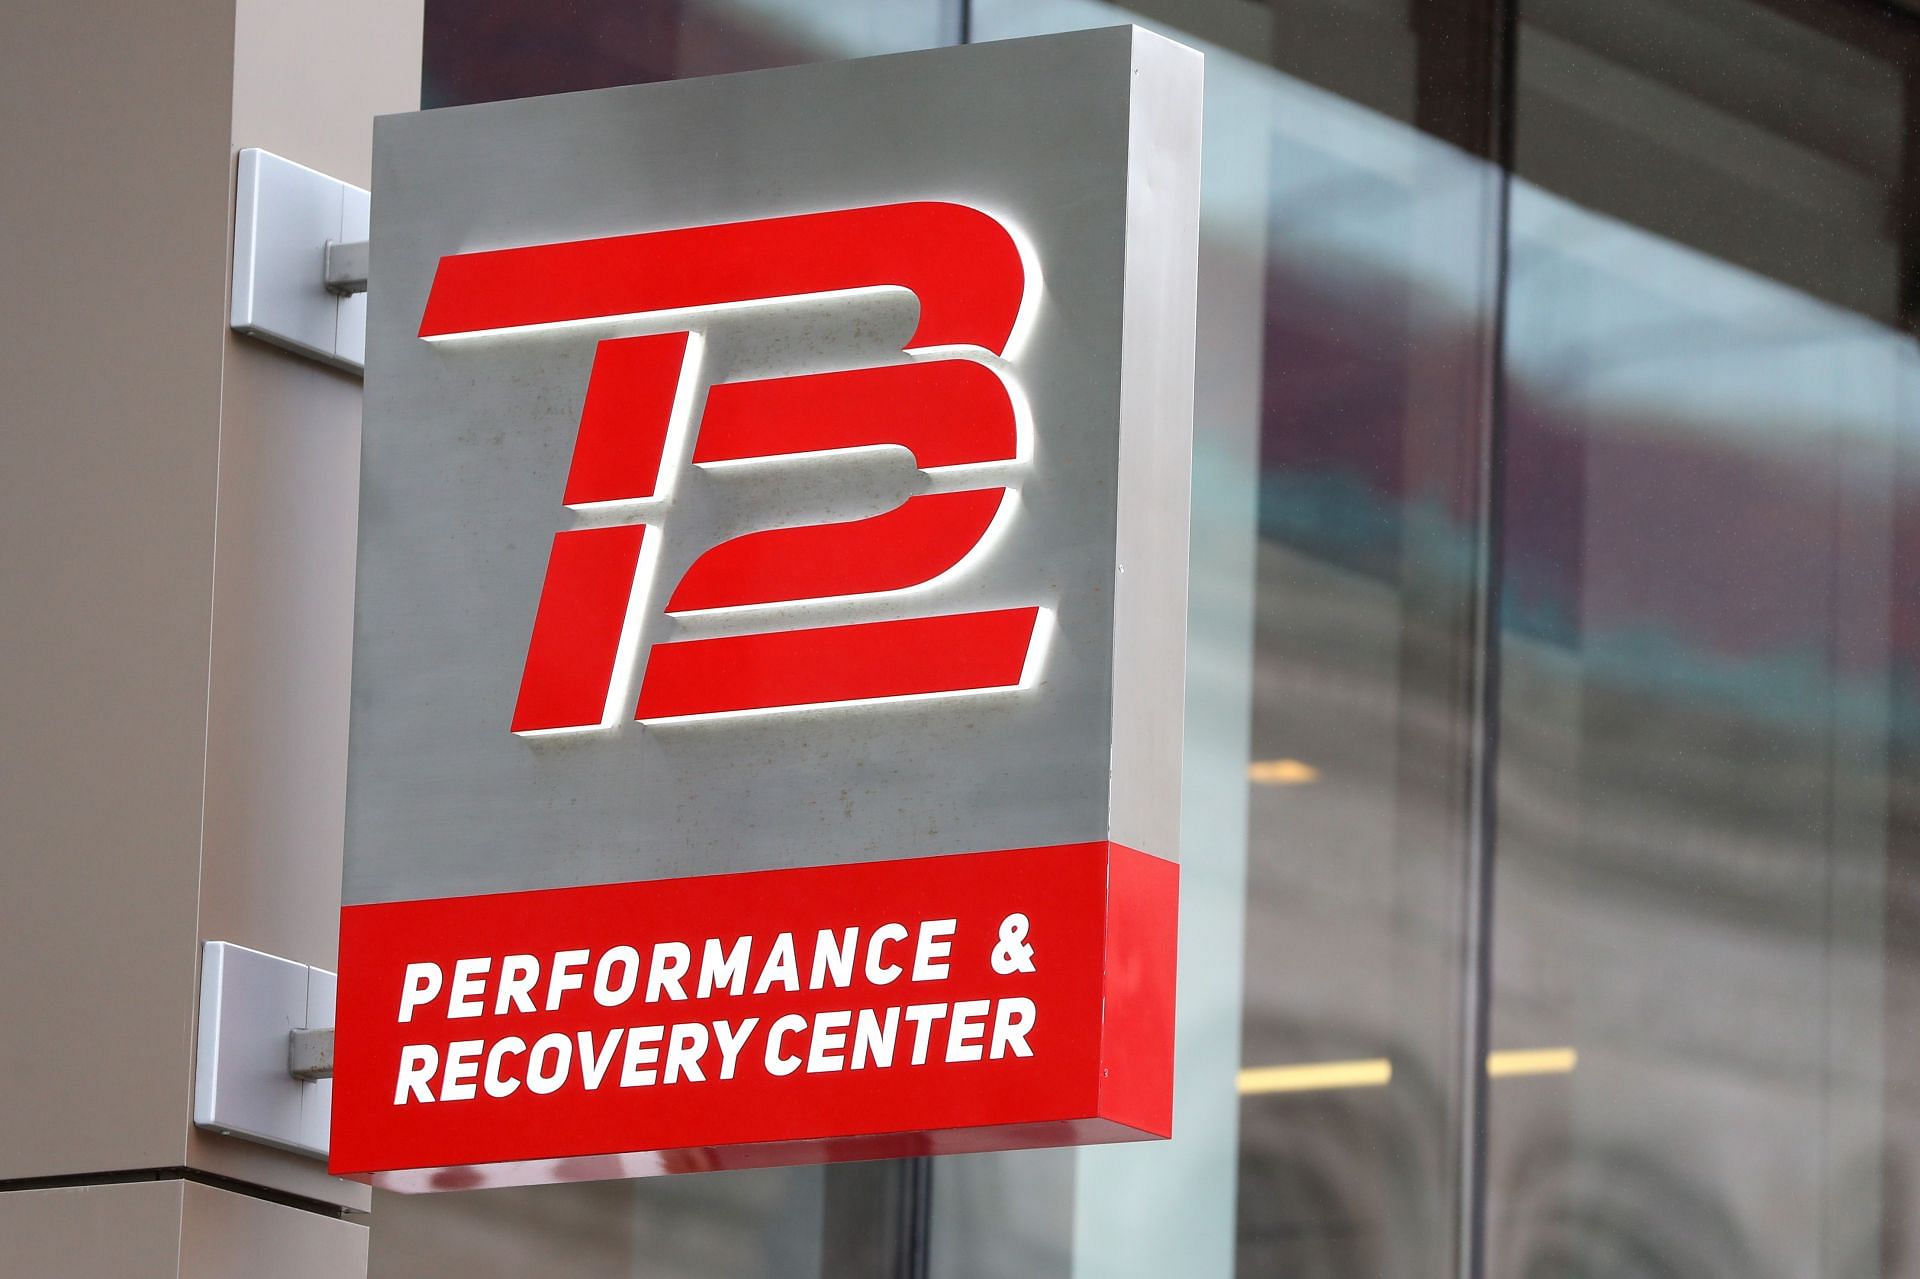 The TB12 Performance and Recovery Center